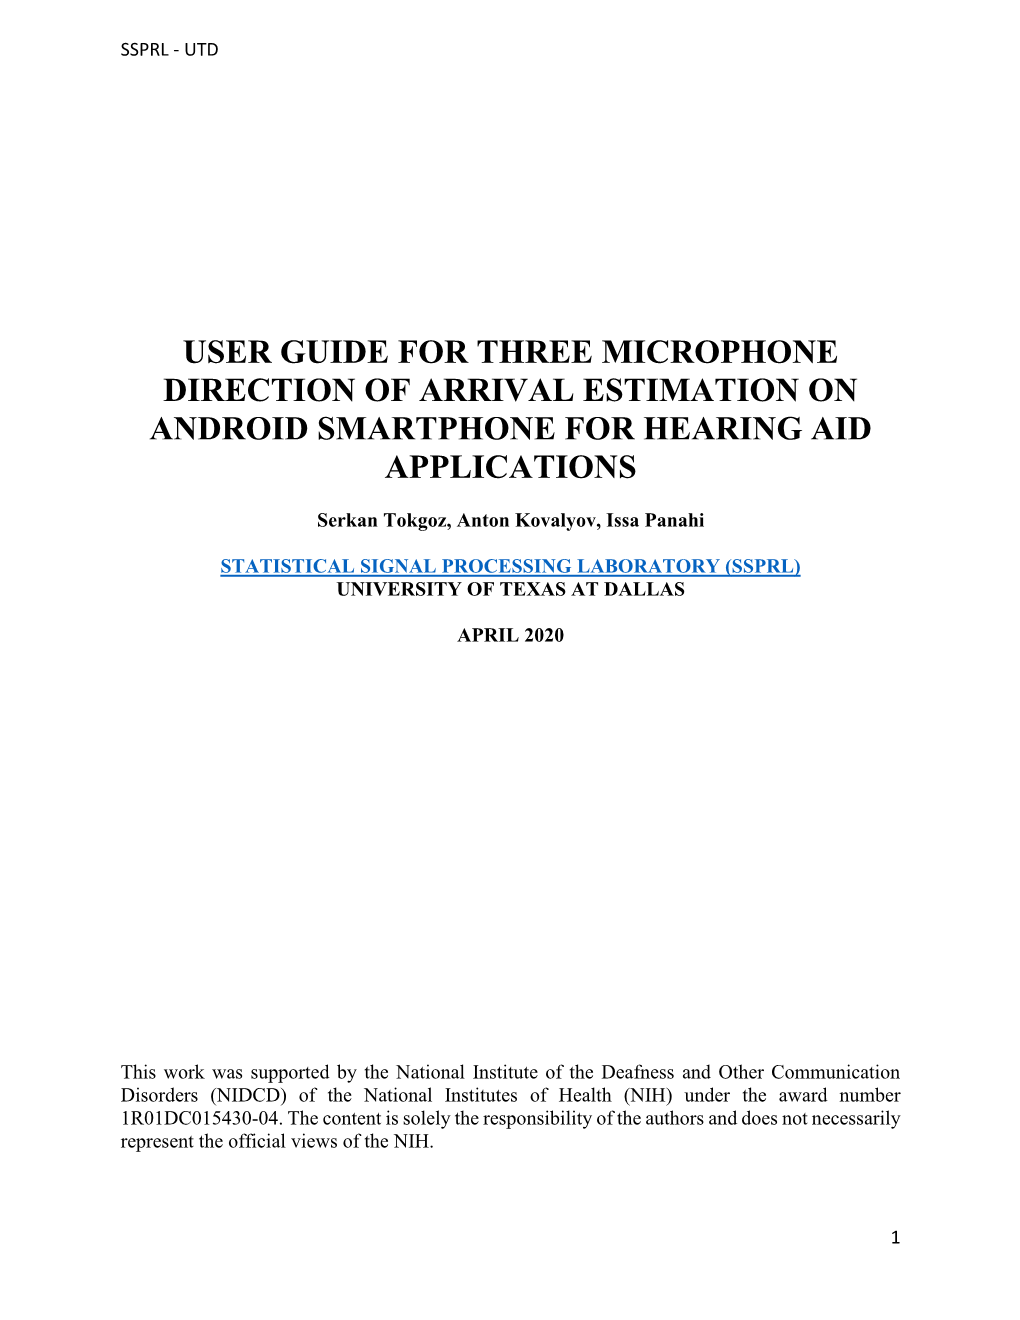 User Guide for Three Microphone Direction of Arrival Estimation on Android Smartphone for Hearing Aid Applications